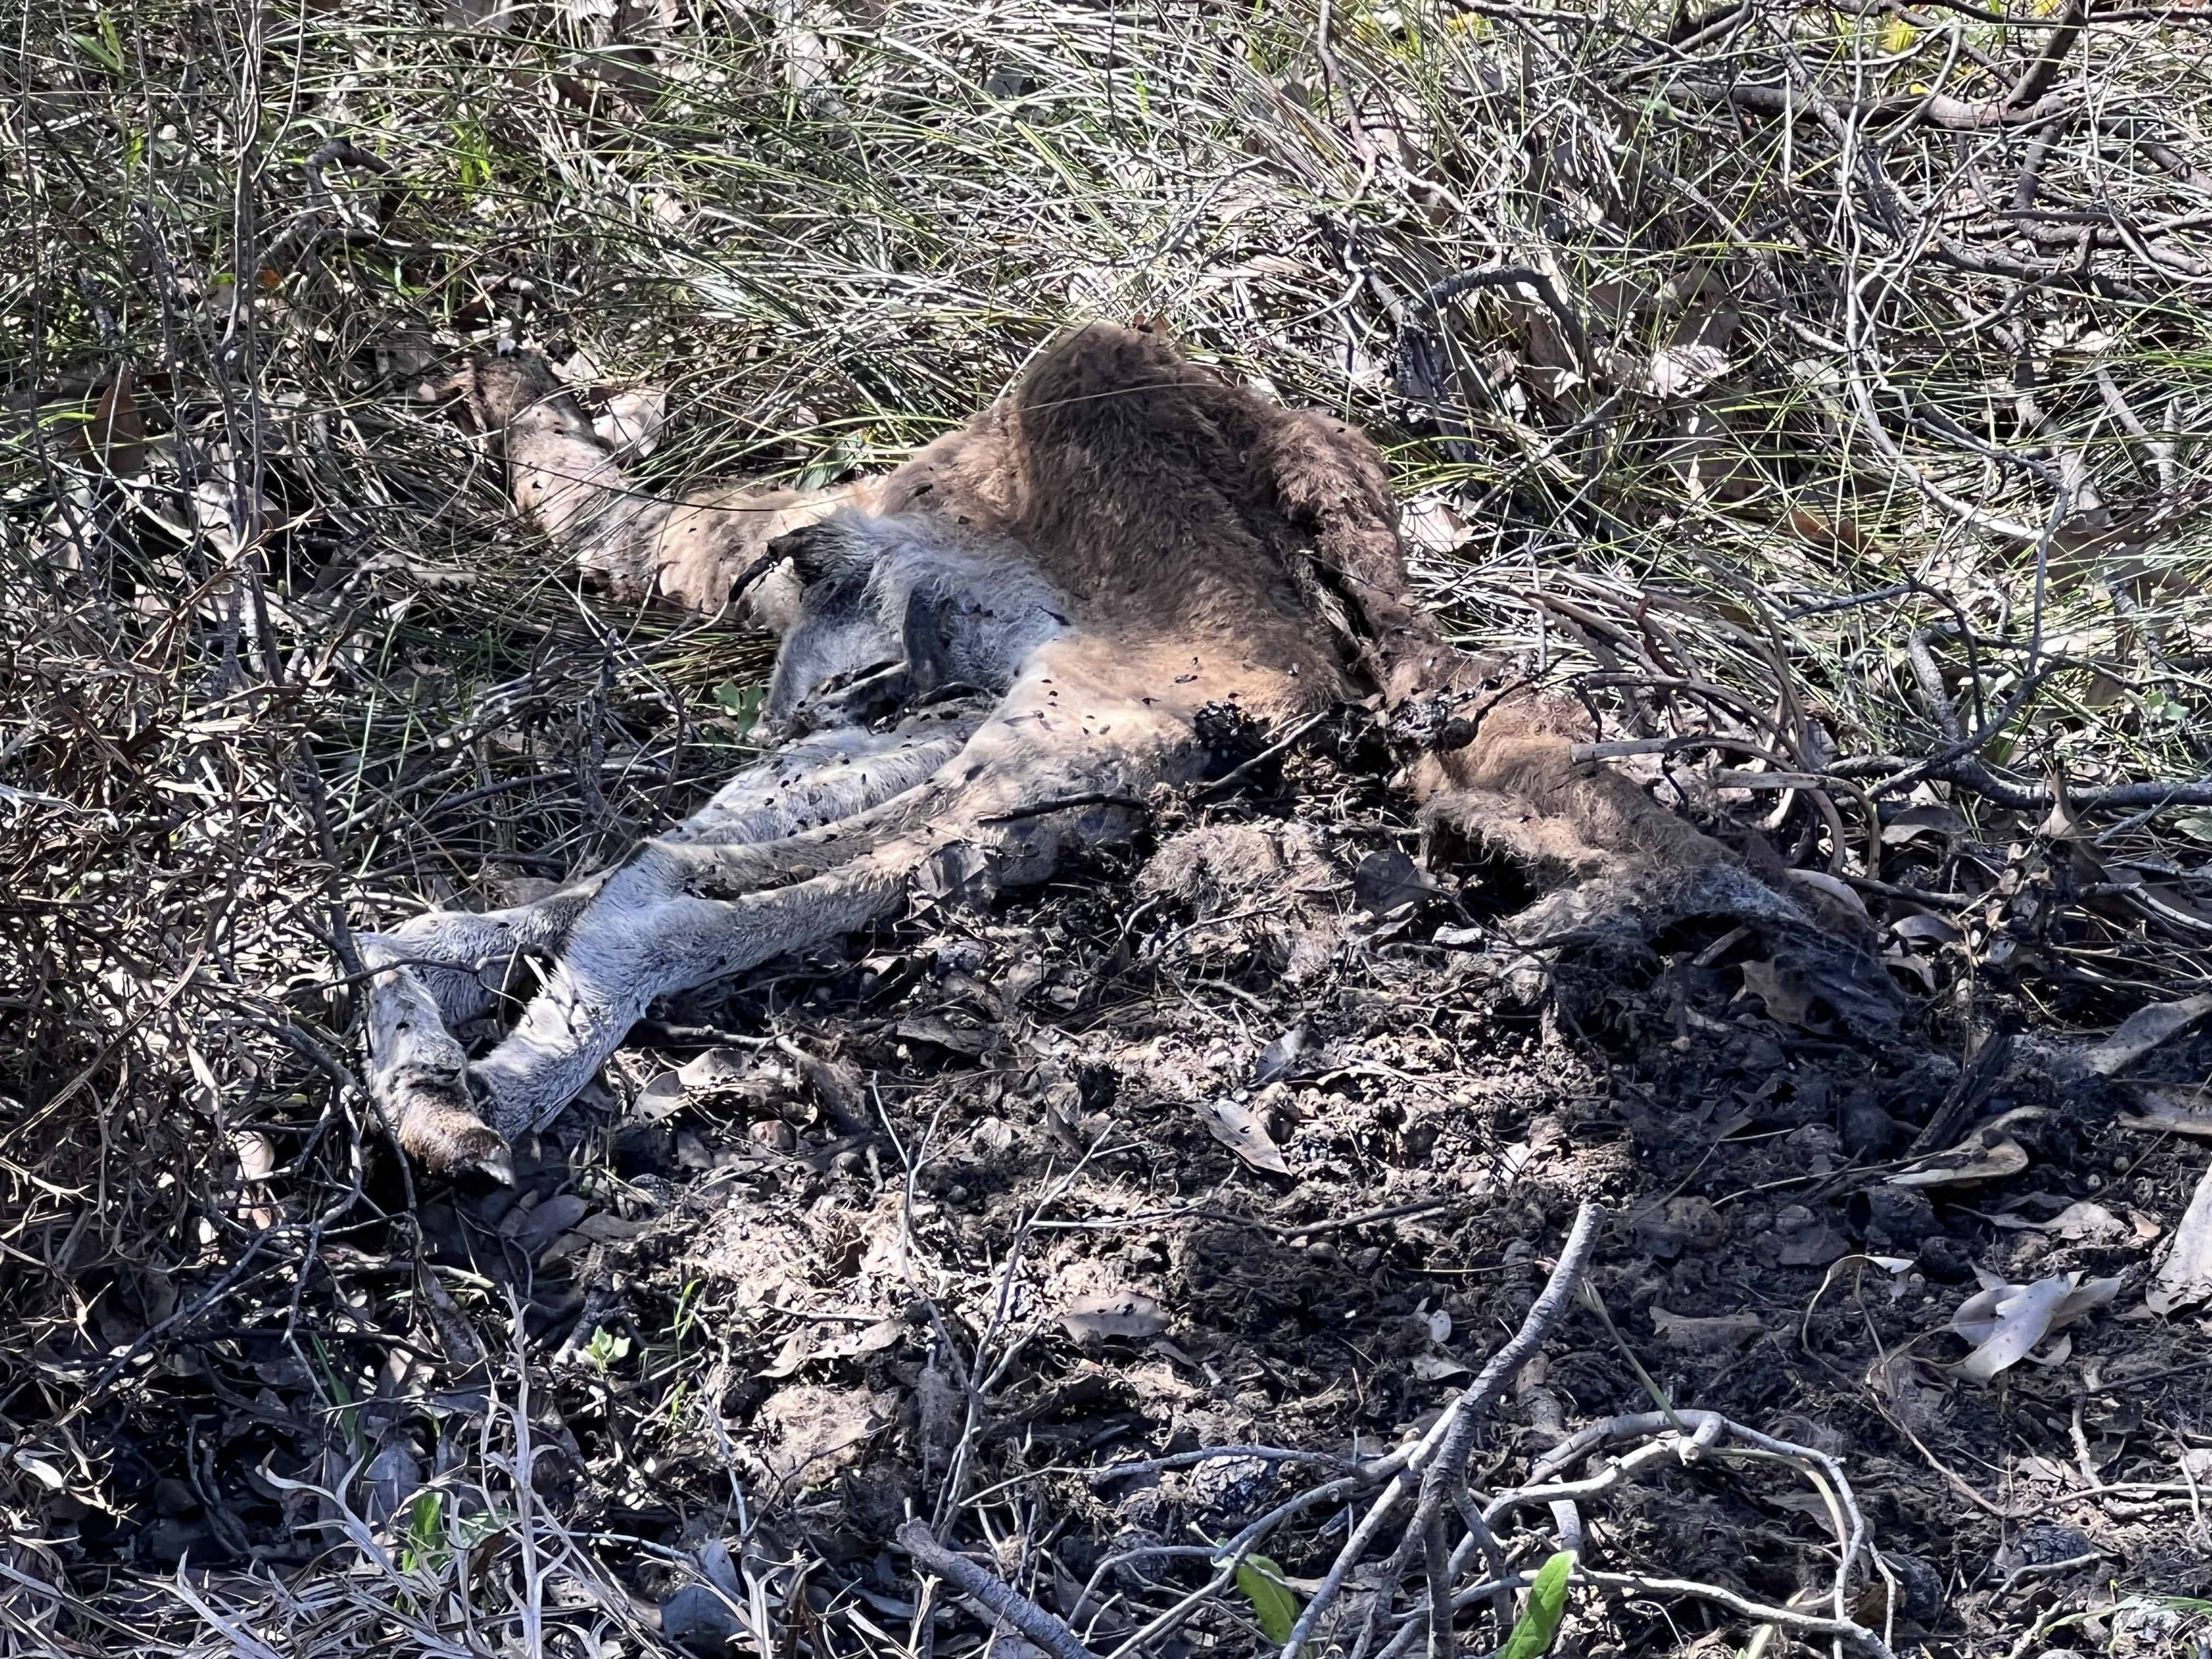 Heavily decayed dead kangaroo in the bush